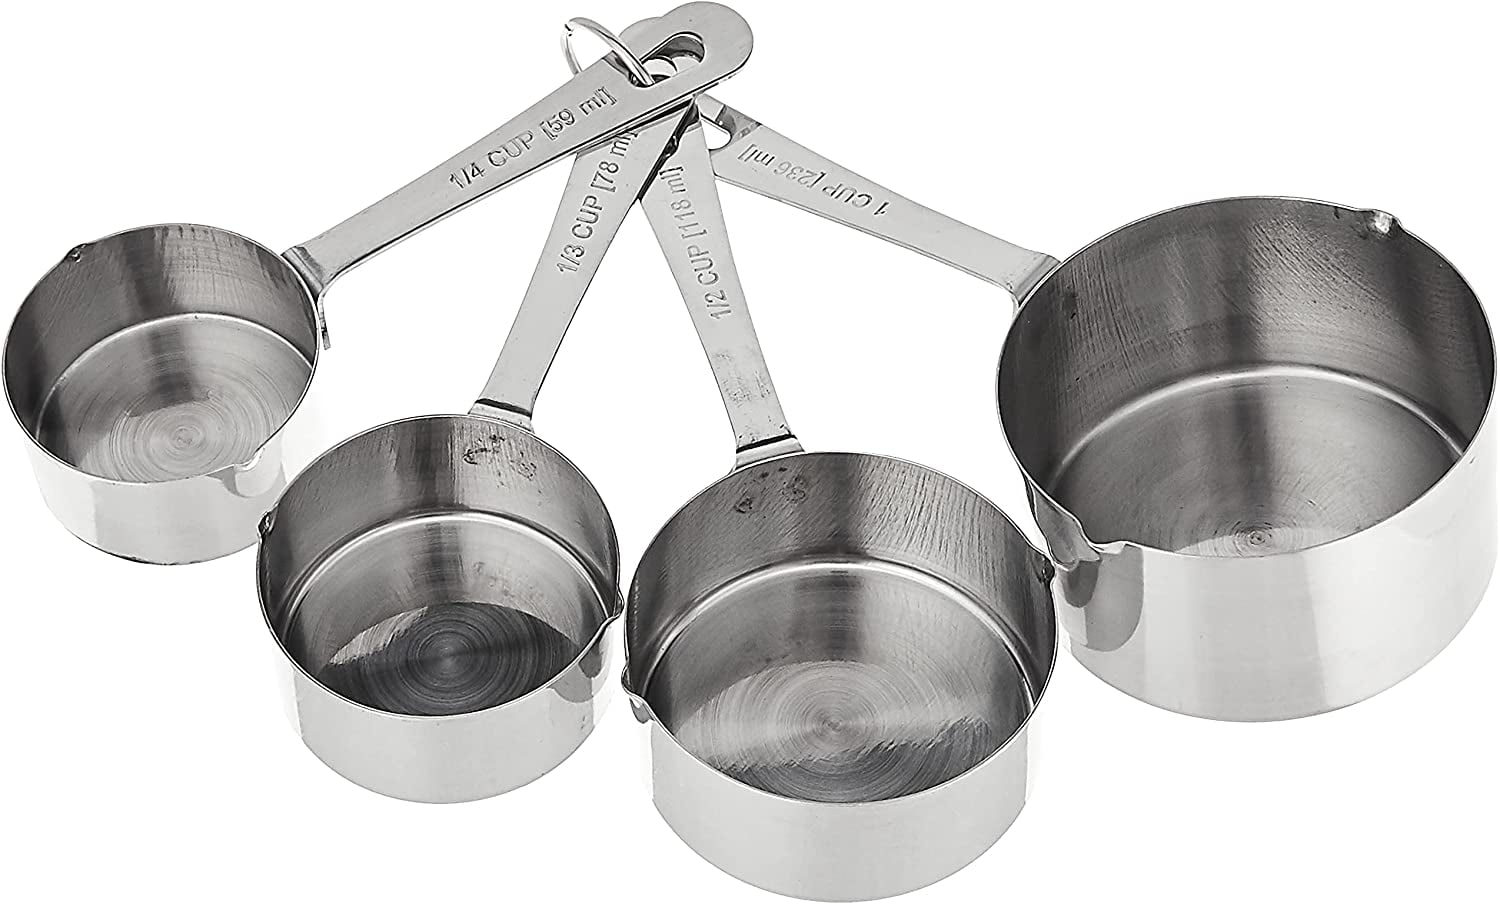 4 Sabatier Stainless Steel Measuring Cups. 3/4 Cup, 1/2 Cup, 1/3 Cup, 1/4  Cup.